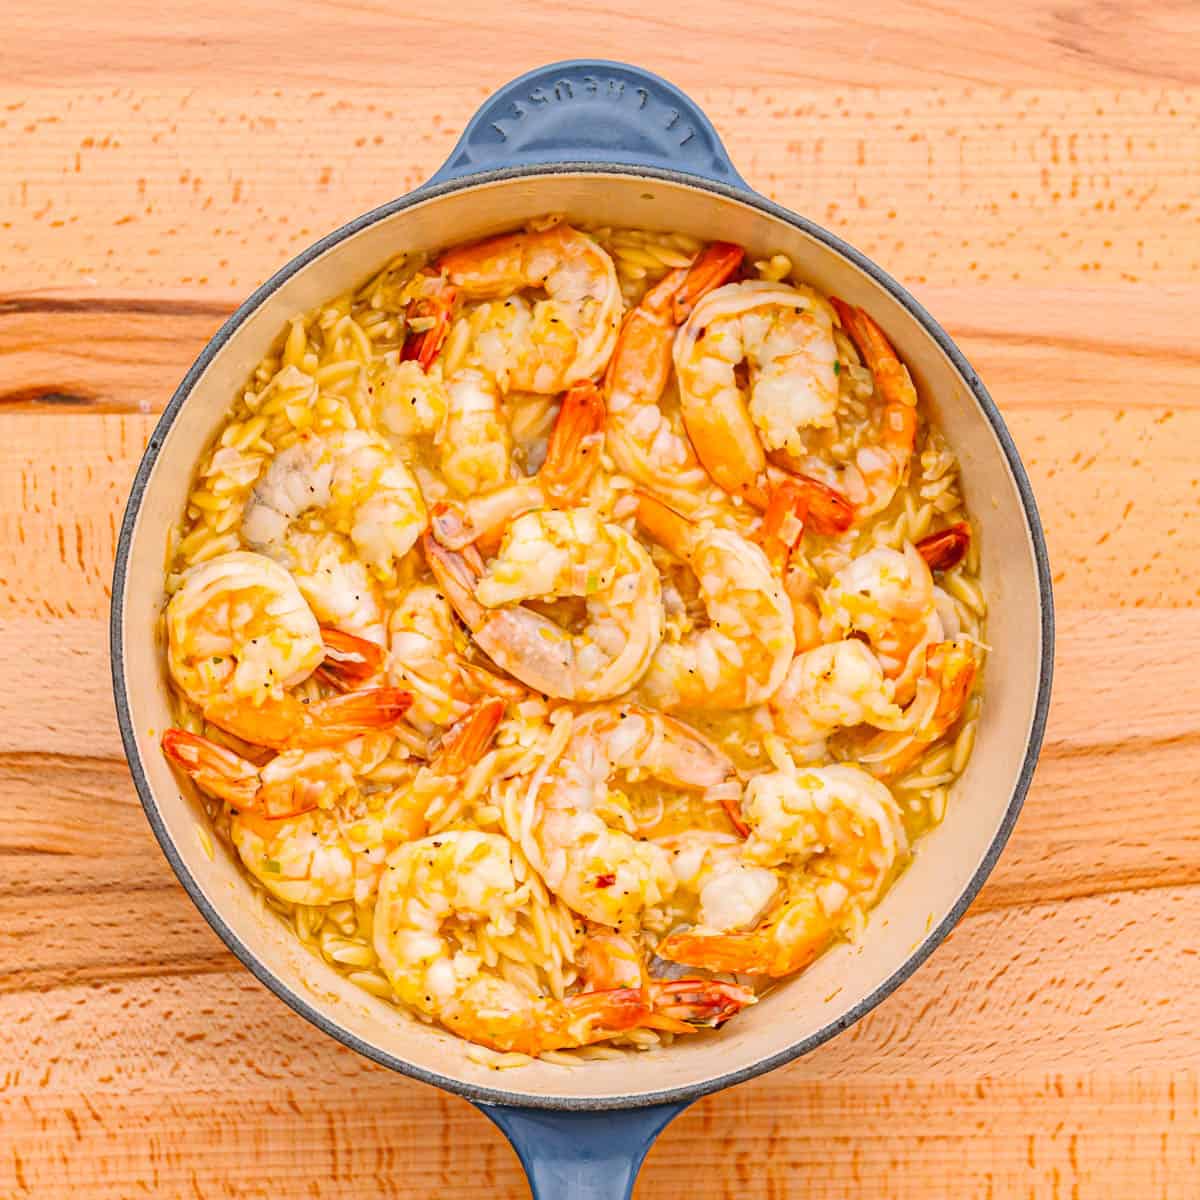 Put the lid back on and continue cooking until the shrimp is fully cooked and the orzo is tender. 